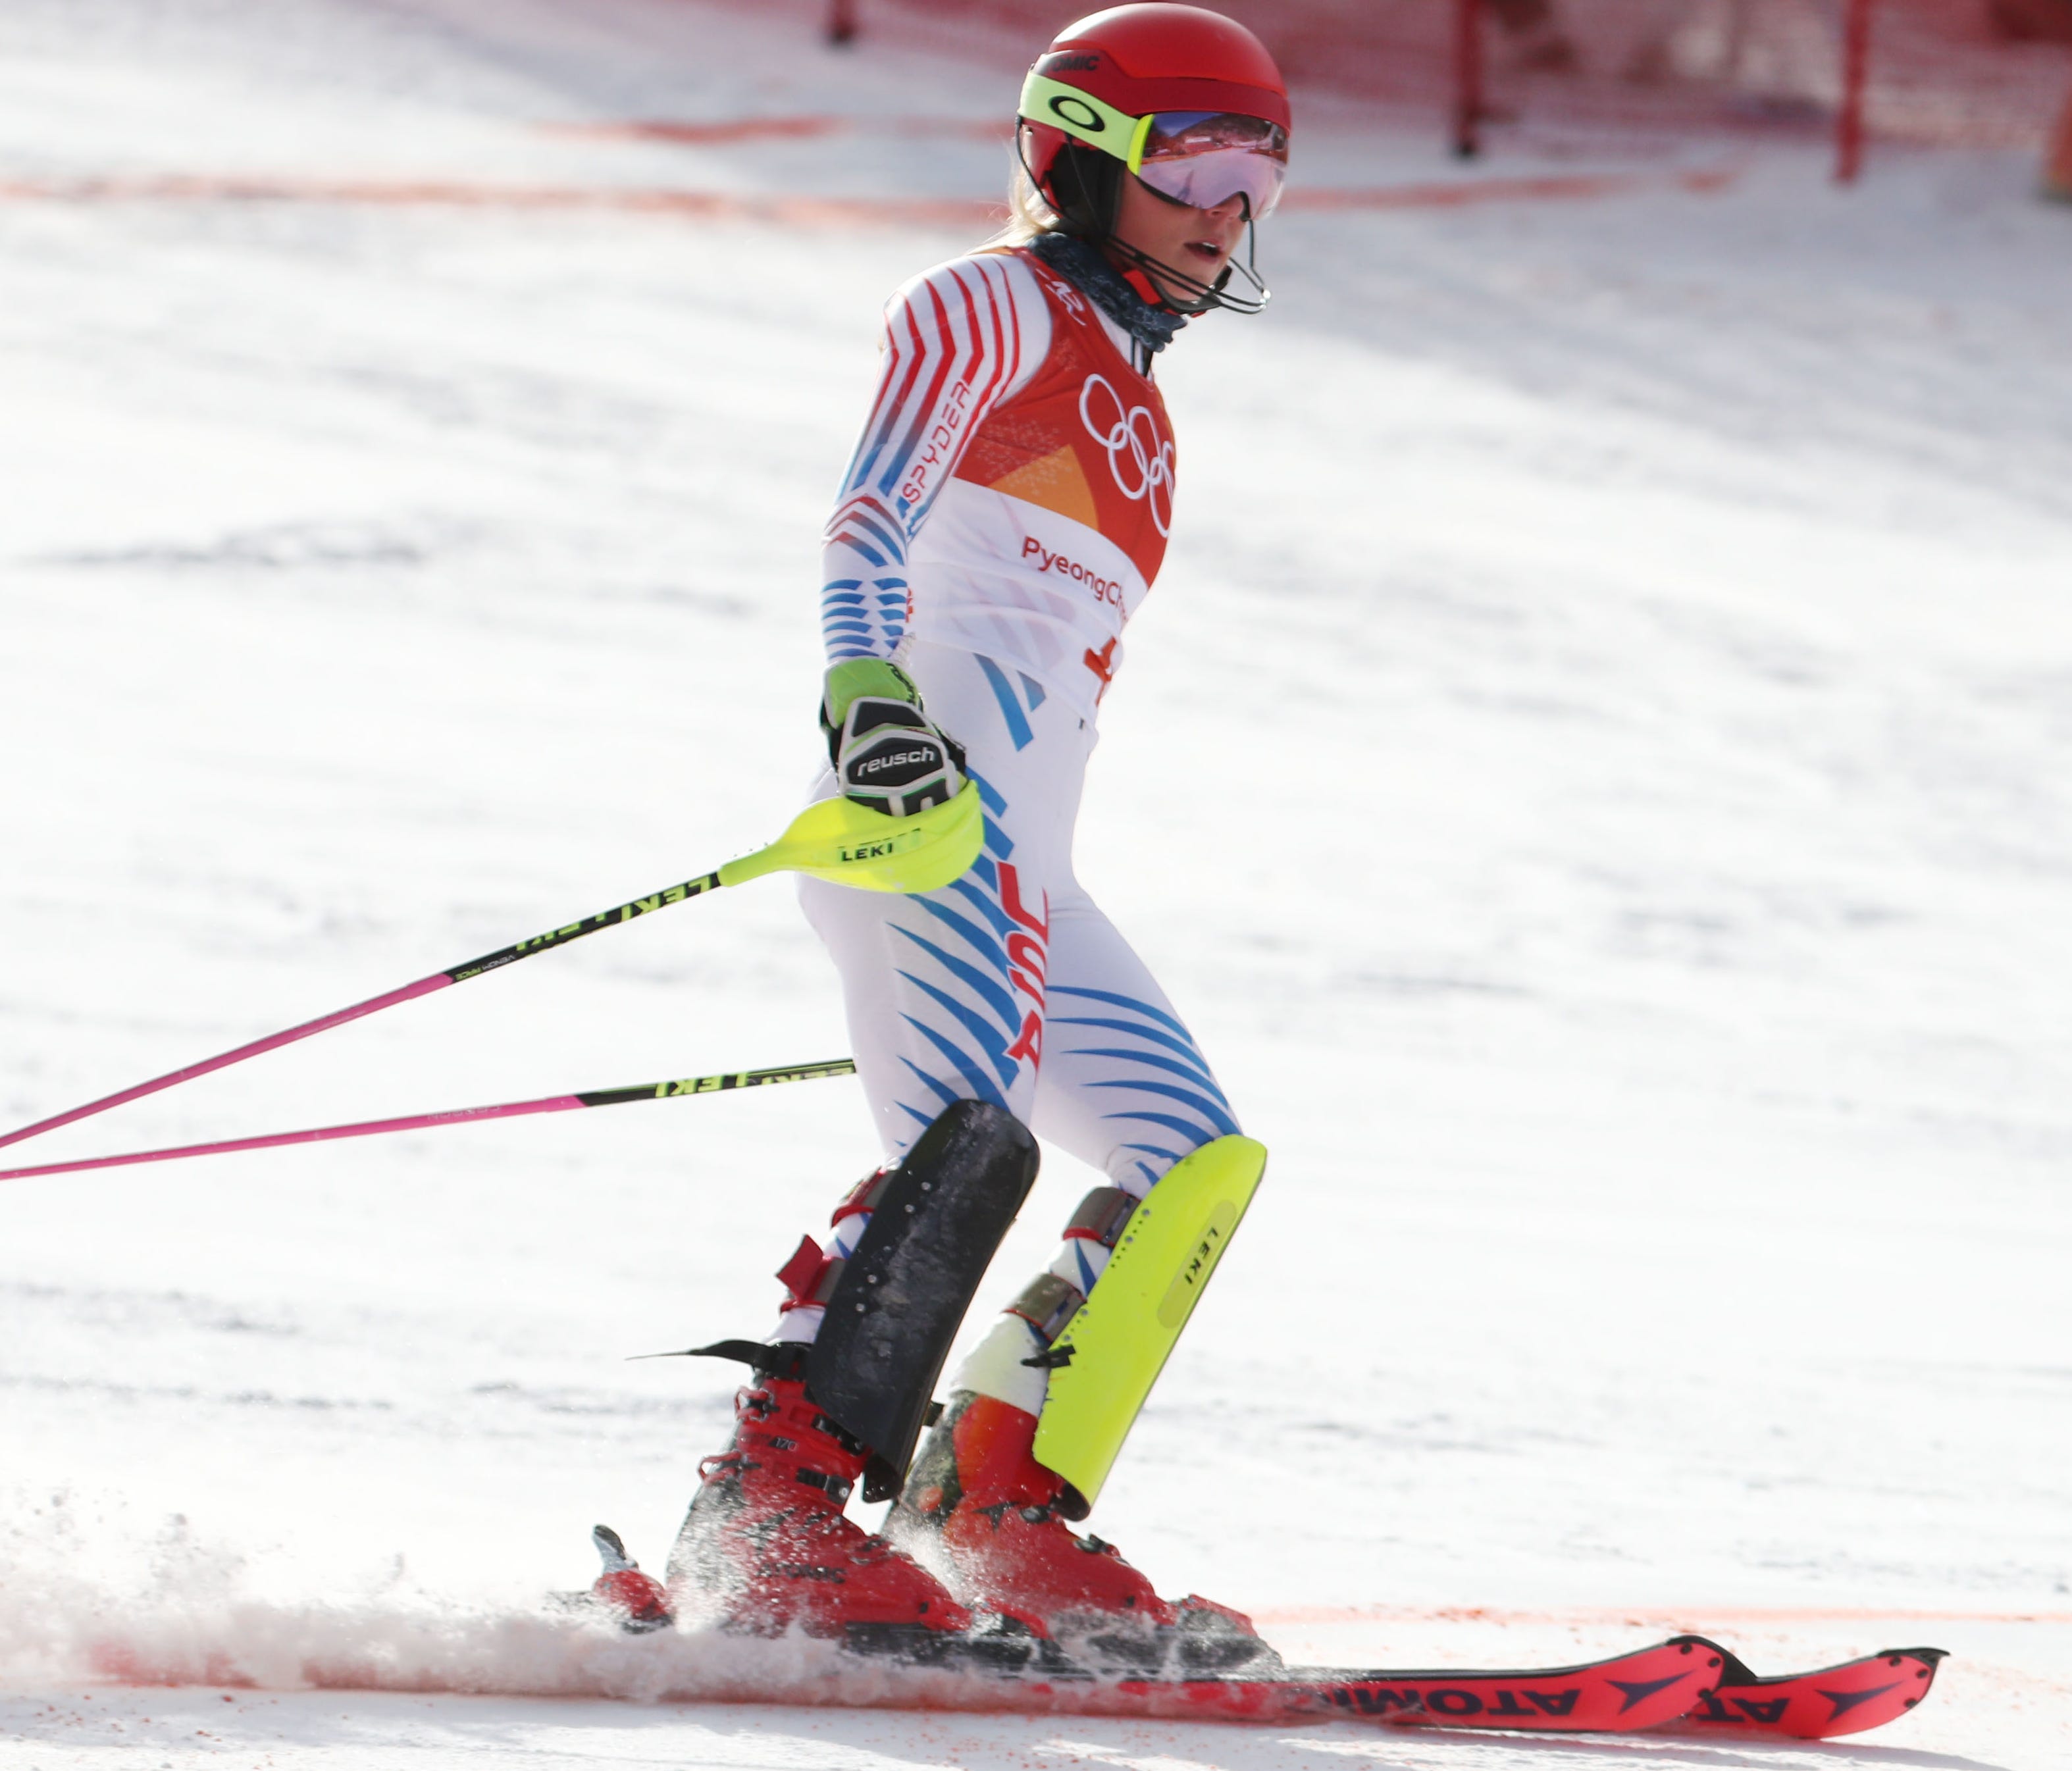 Mikaela Shiffrin may have beaten herself in the Olympic slalom.